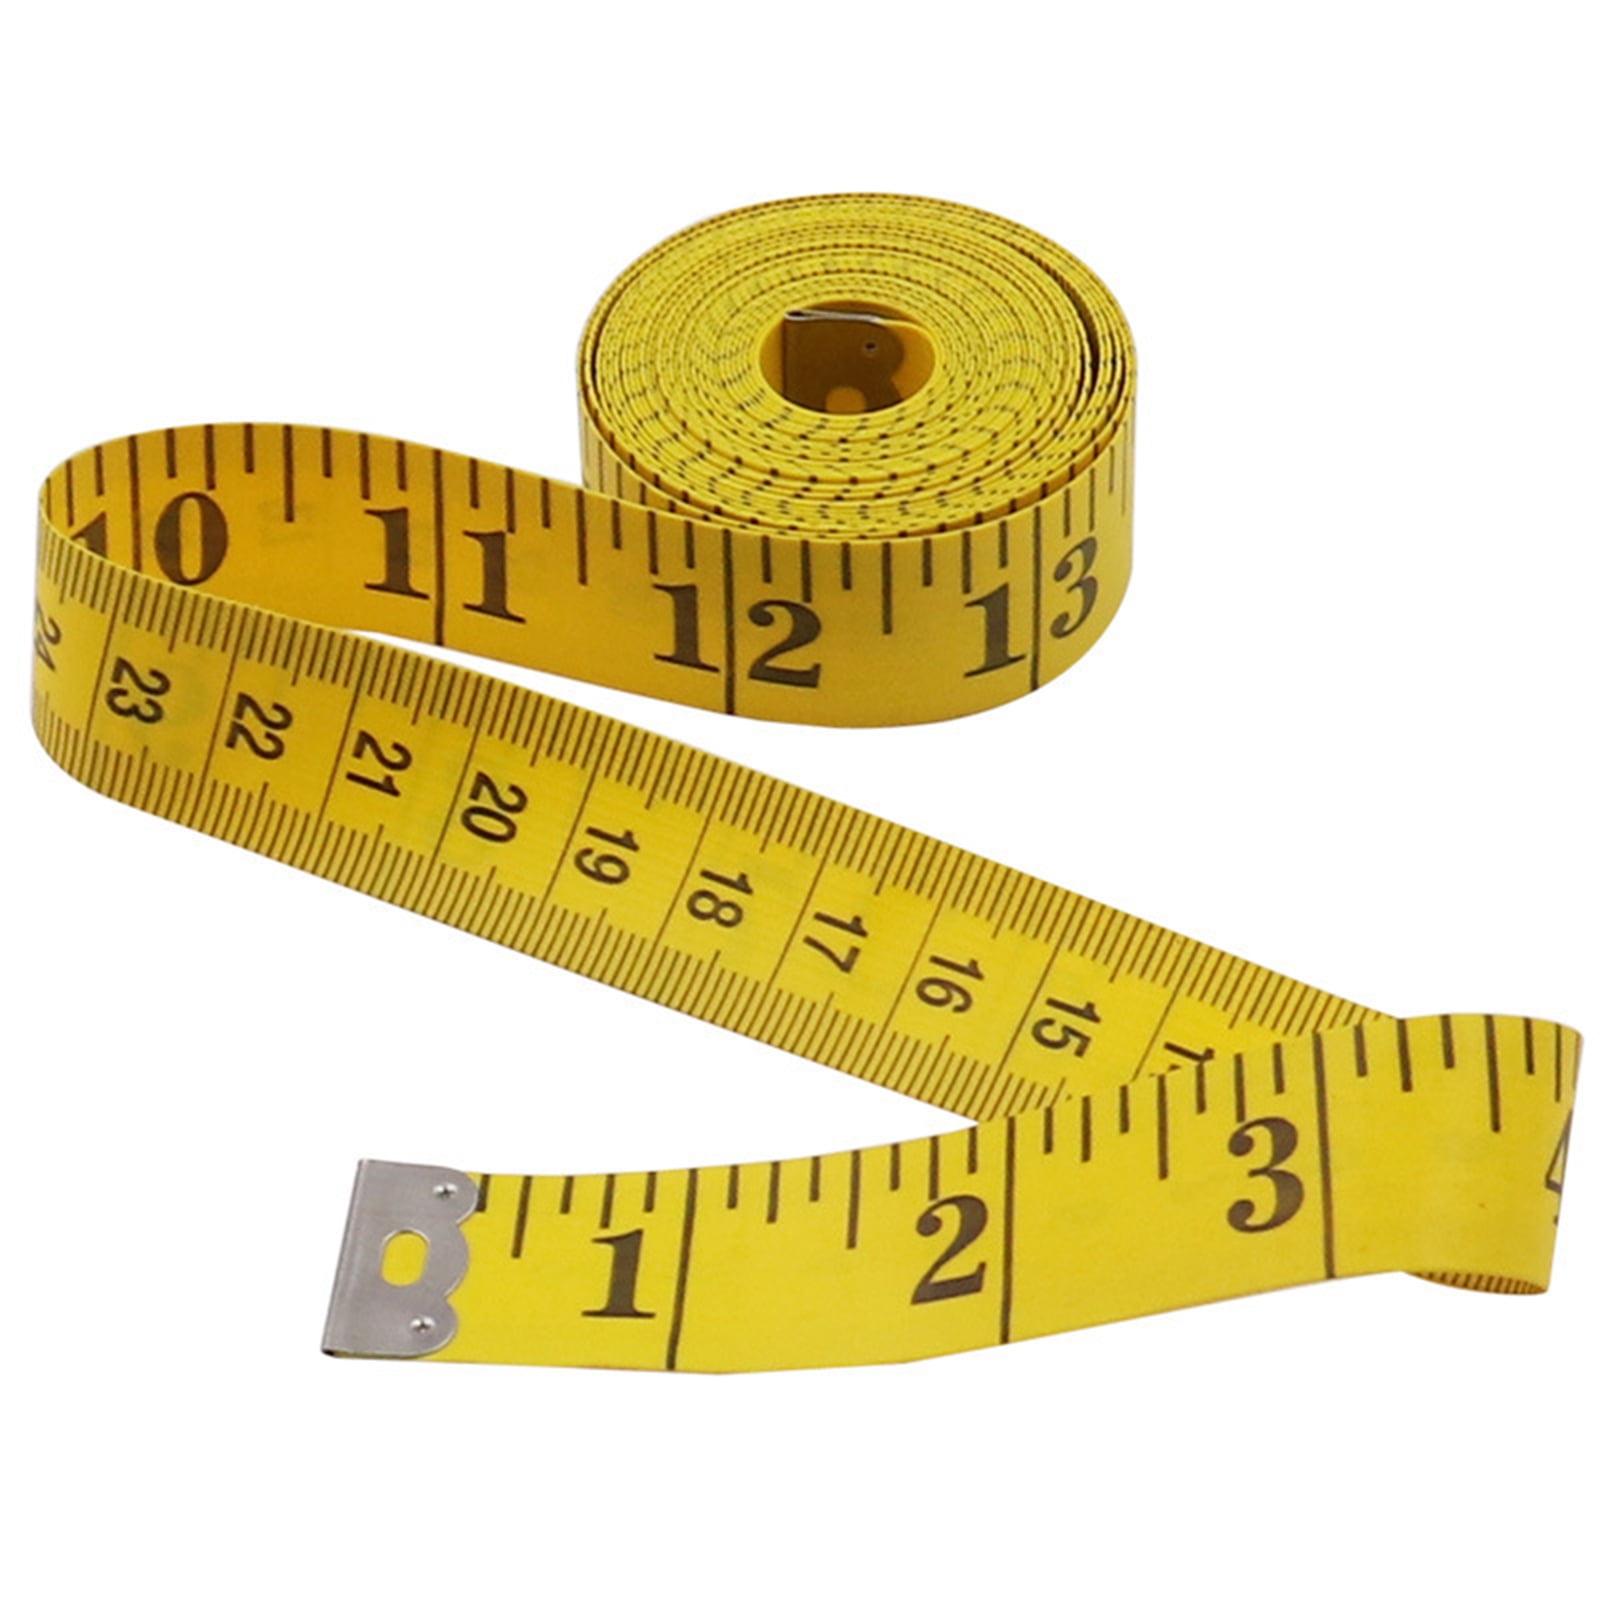 Measuring Tape For Tailor Cutter And Seamstress. Is A Flexible